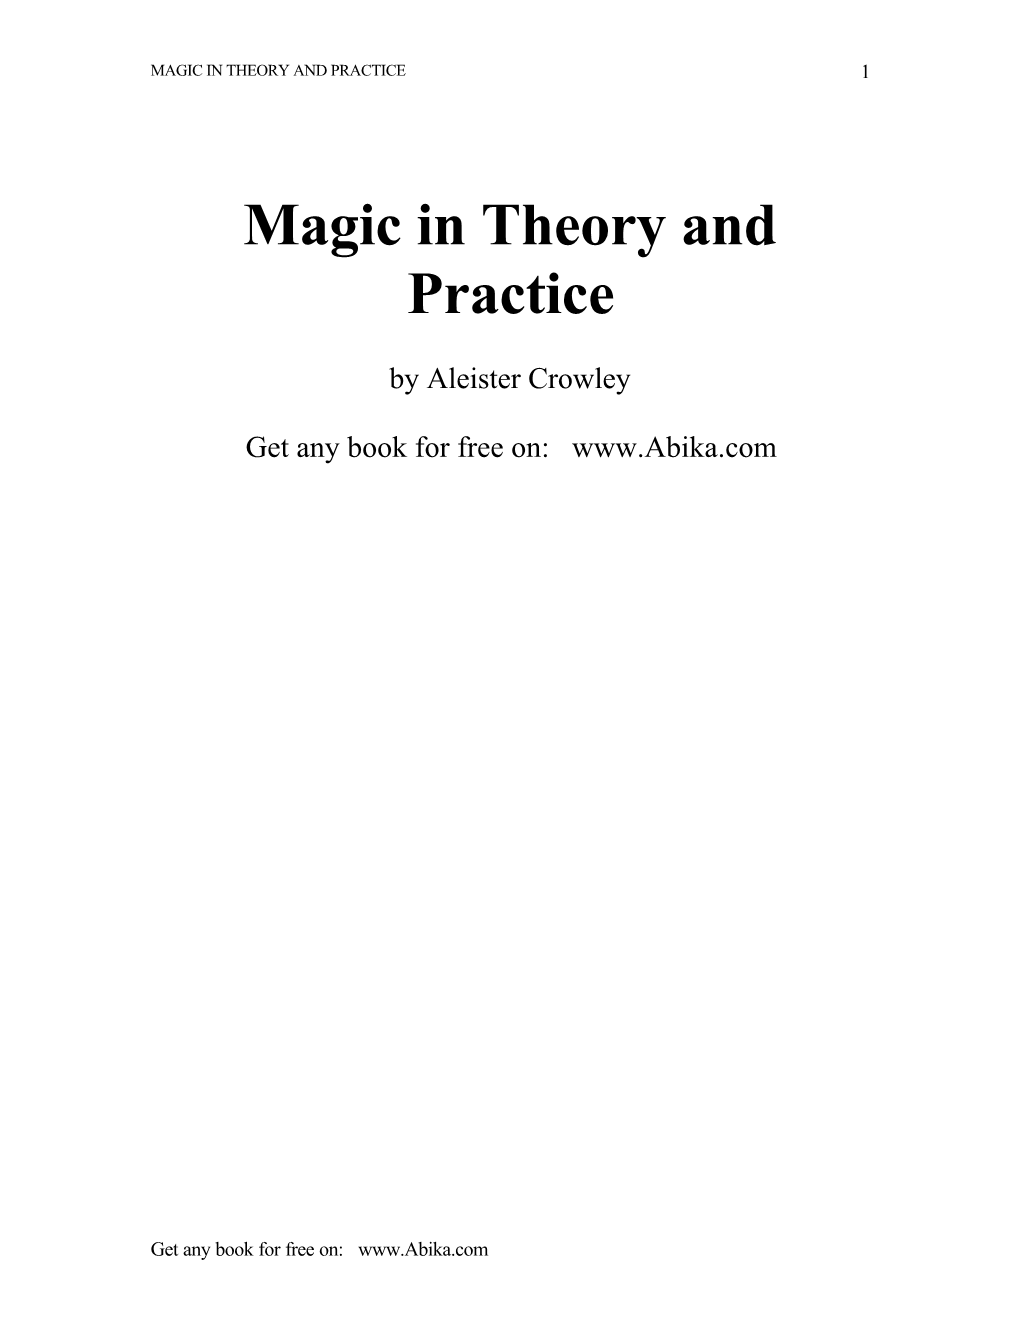 Aleister Crowley – Magic in Theory and Practice